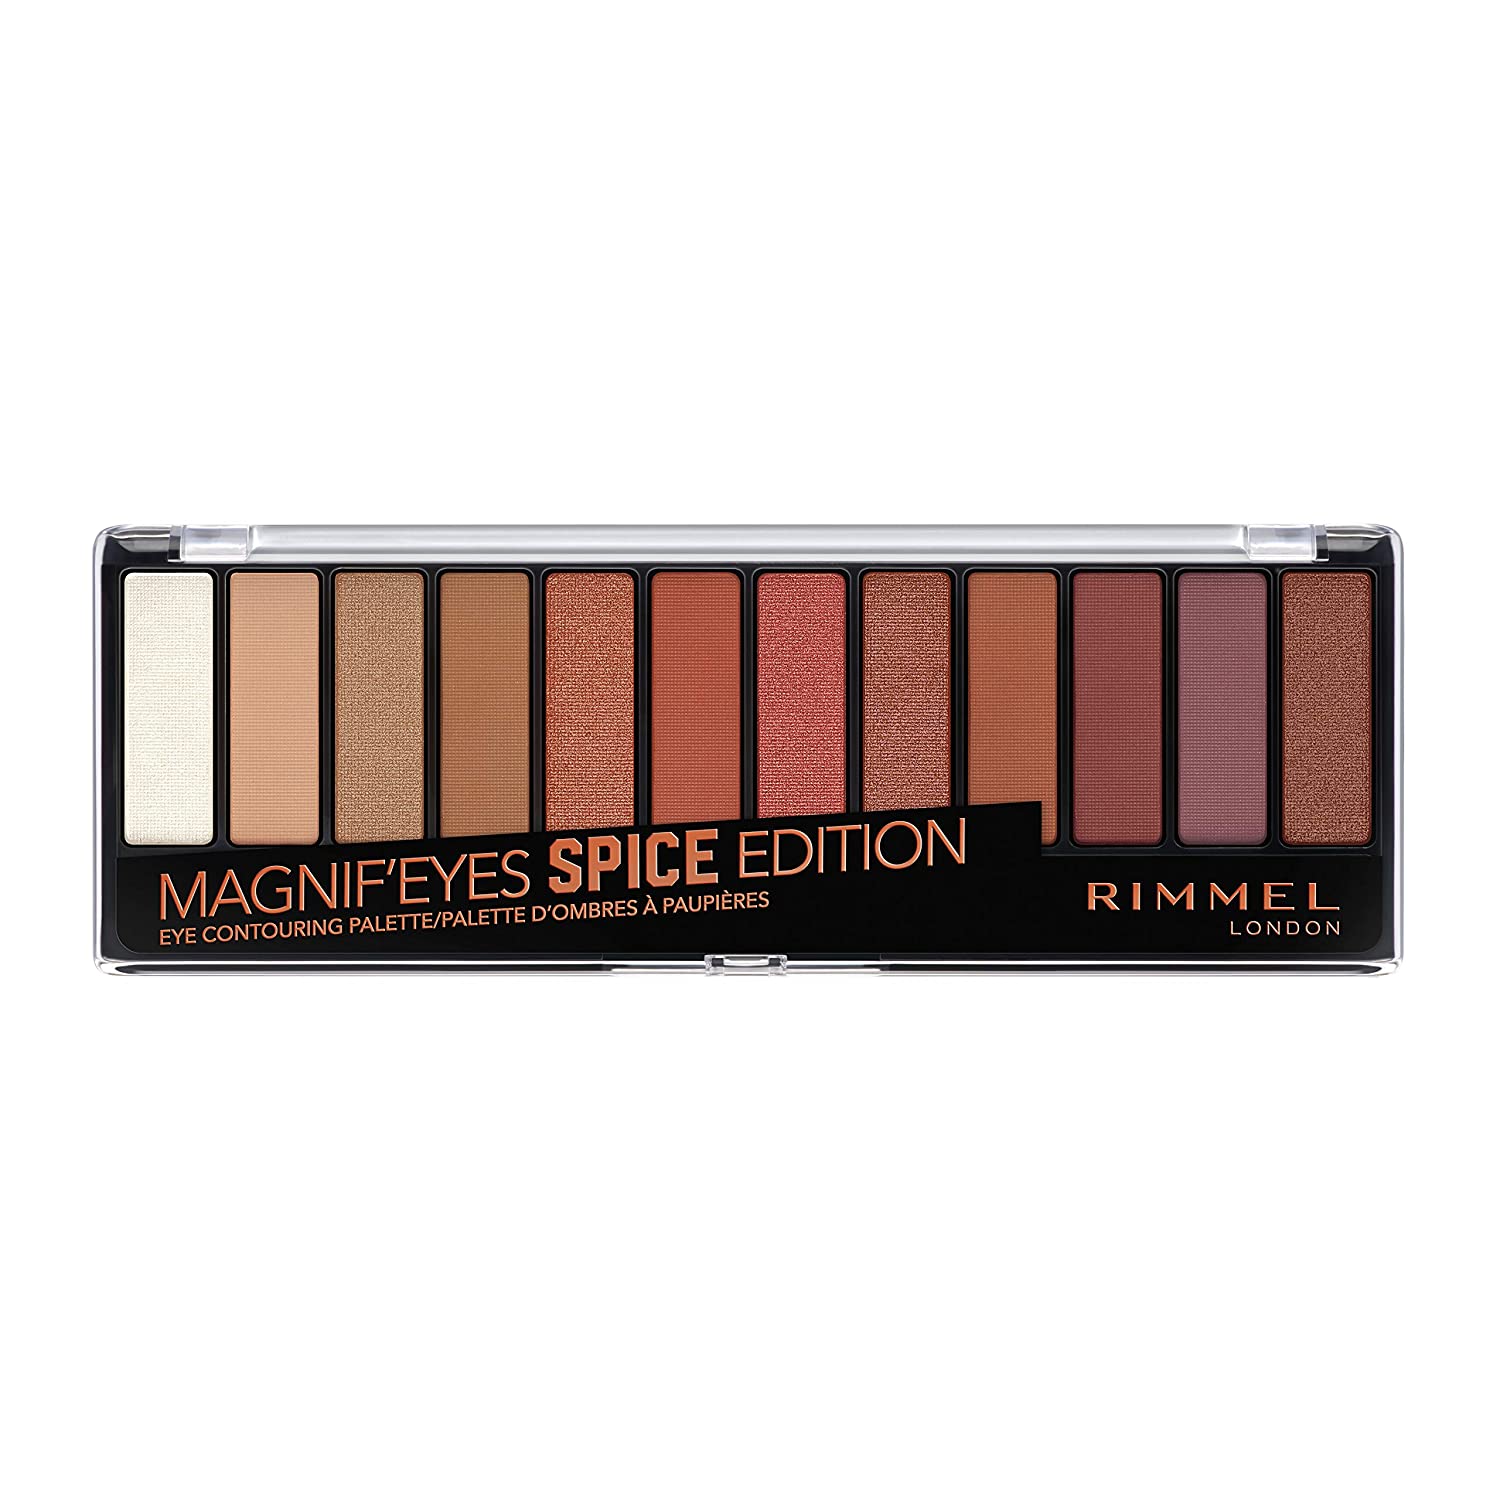 Rimmel Magnif'eyes Eyeshadow Palette (Spice Edition) $2 + free shipping w/ Prime or on orders over $25.